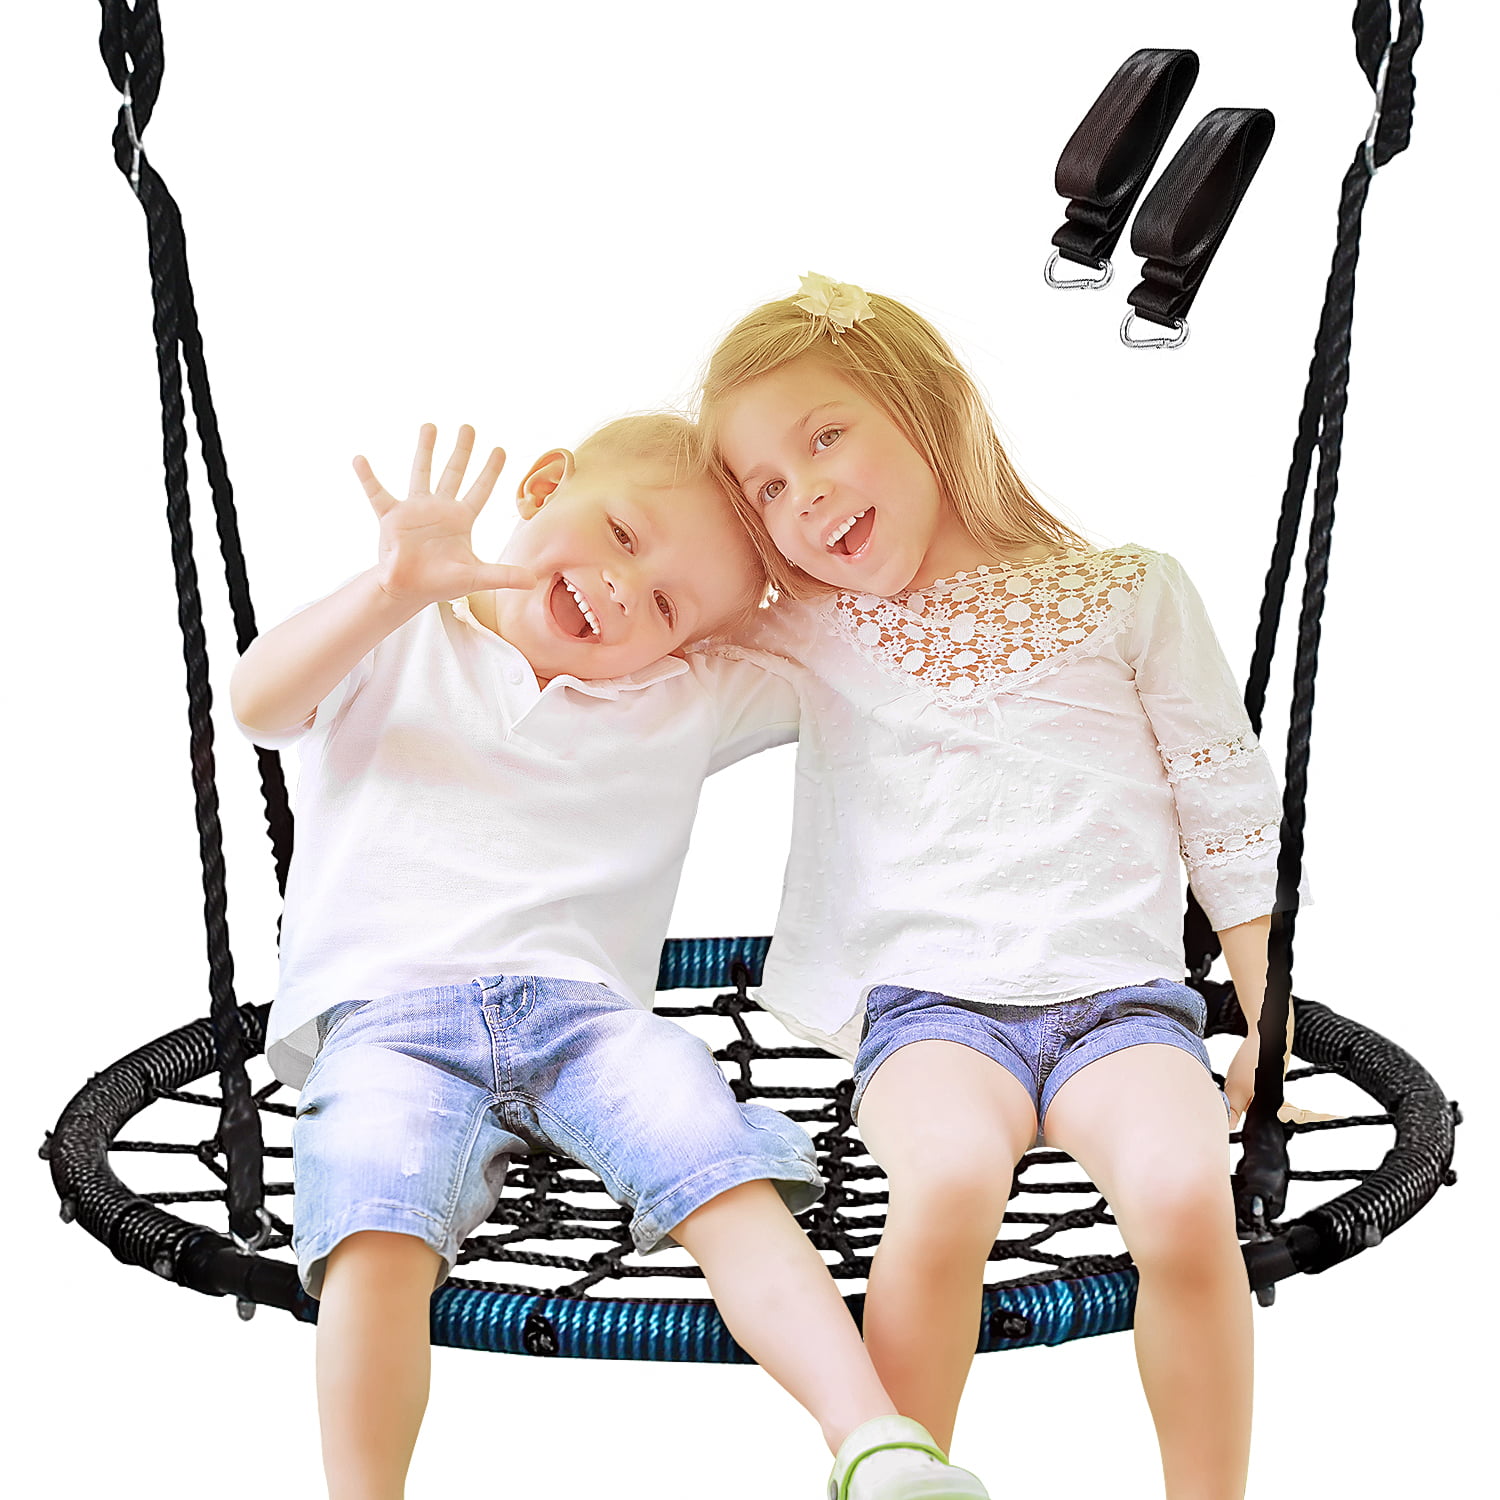 Bonus Spinner Easy Hang 100% Waterproof Easy Picture Instructions - Heavy Duty Carabiner Carry Bag Included! Perfect for Tire and Saucer Swings 12FT Tree Swing Strap X1 Holds 2200lbs 